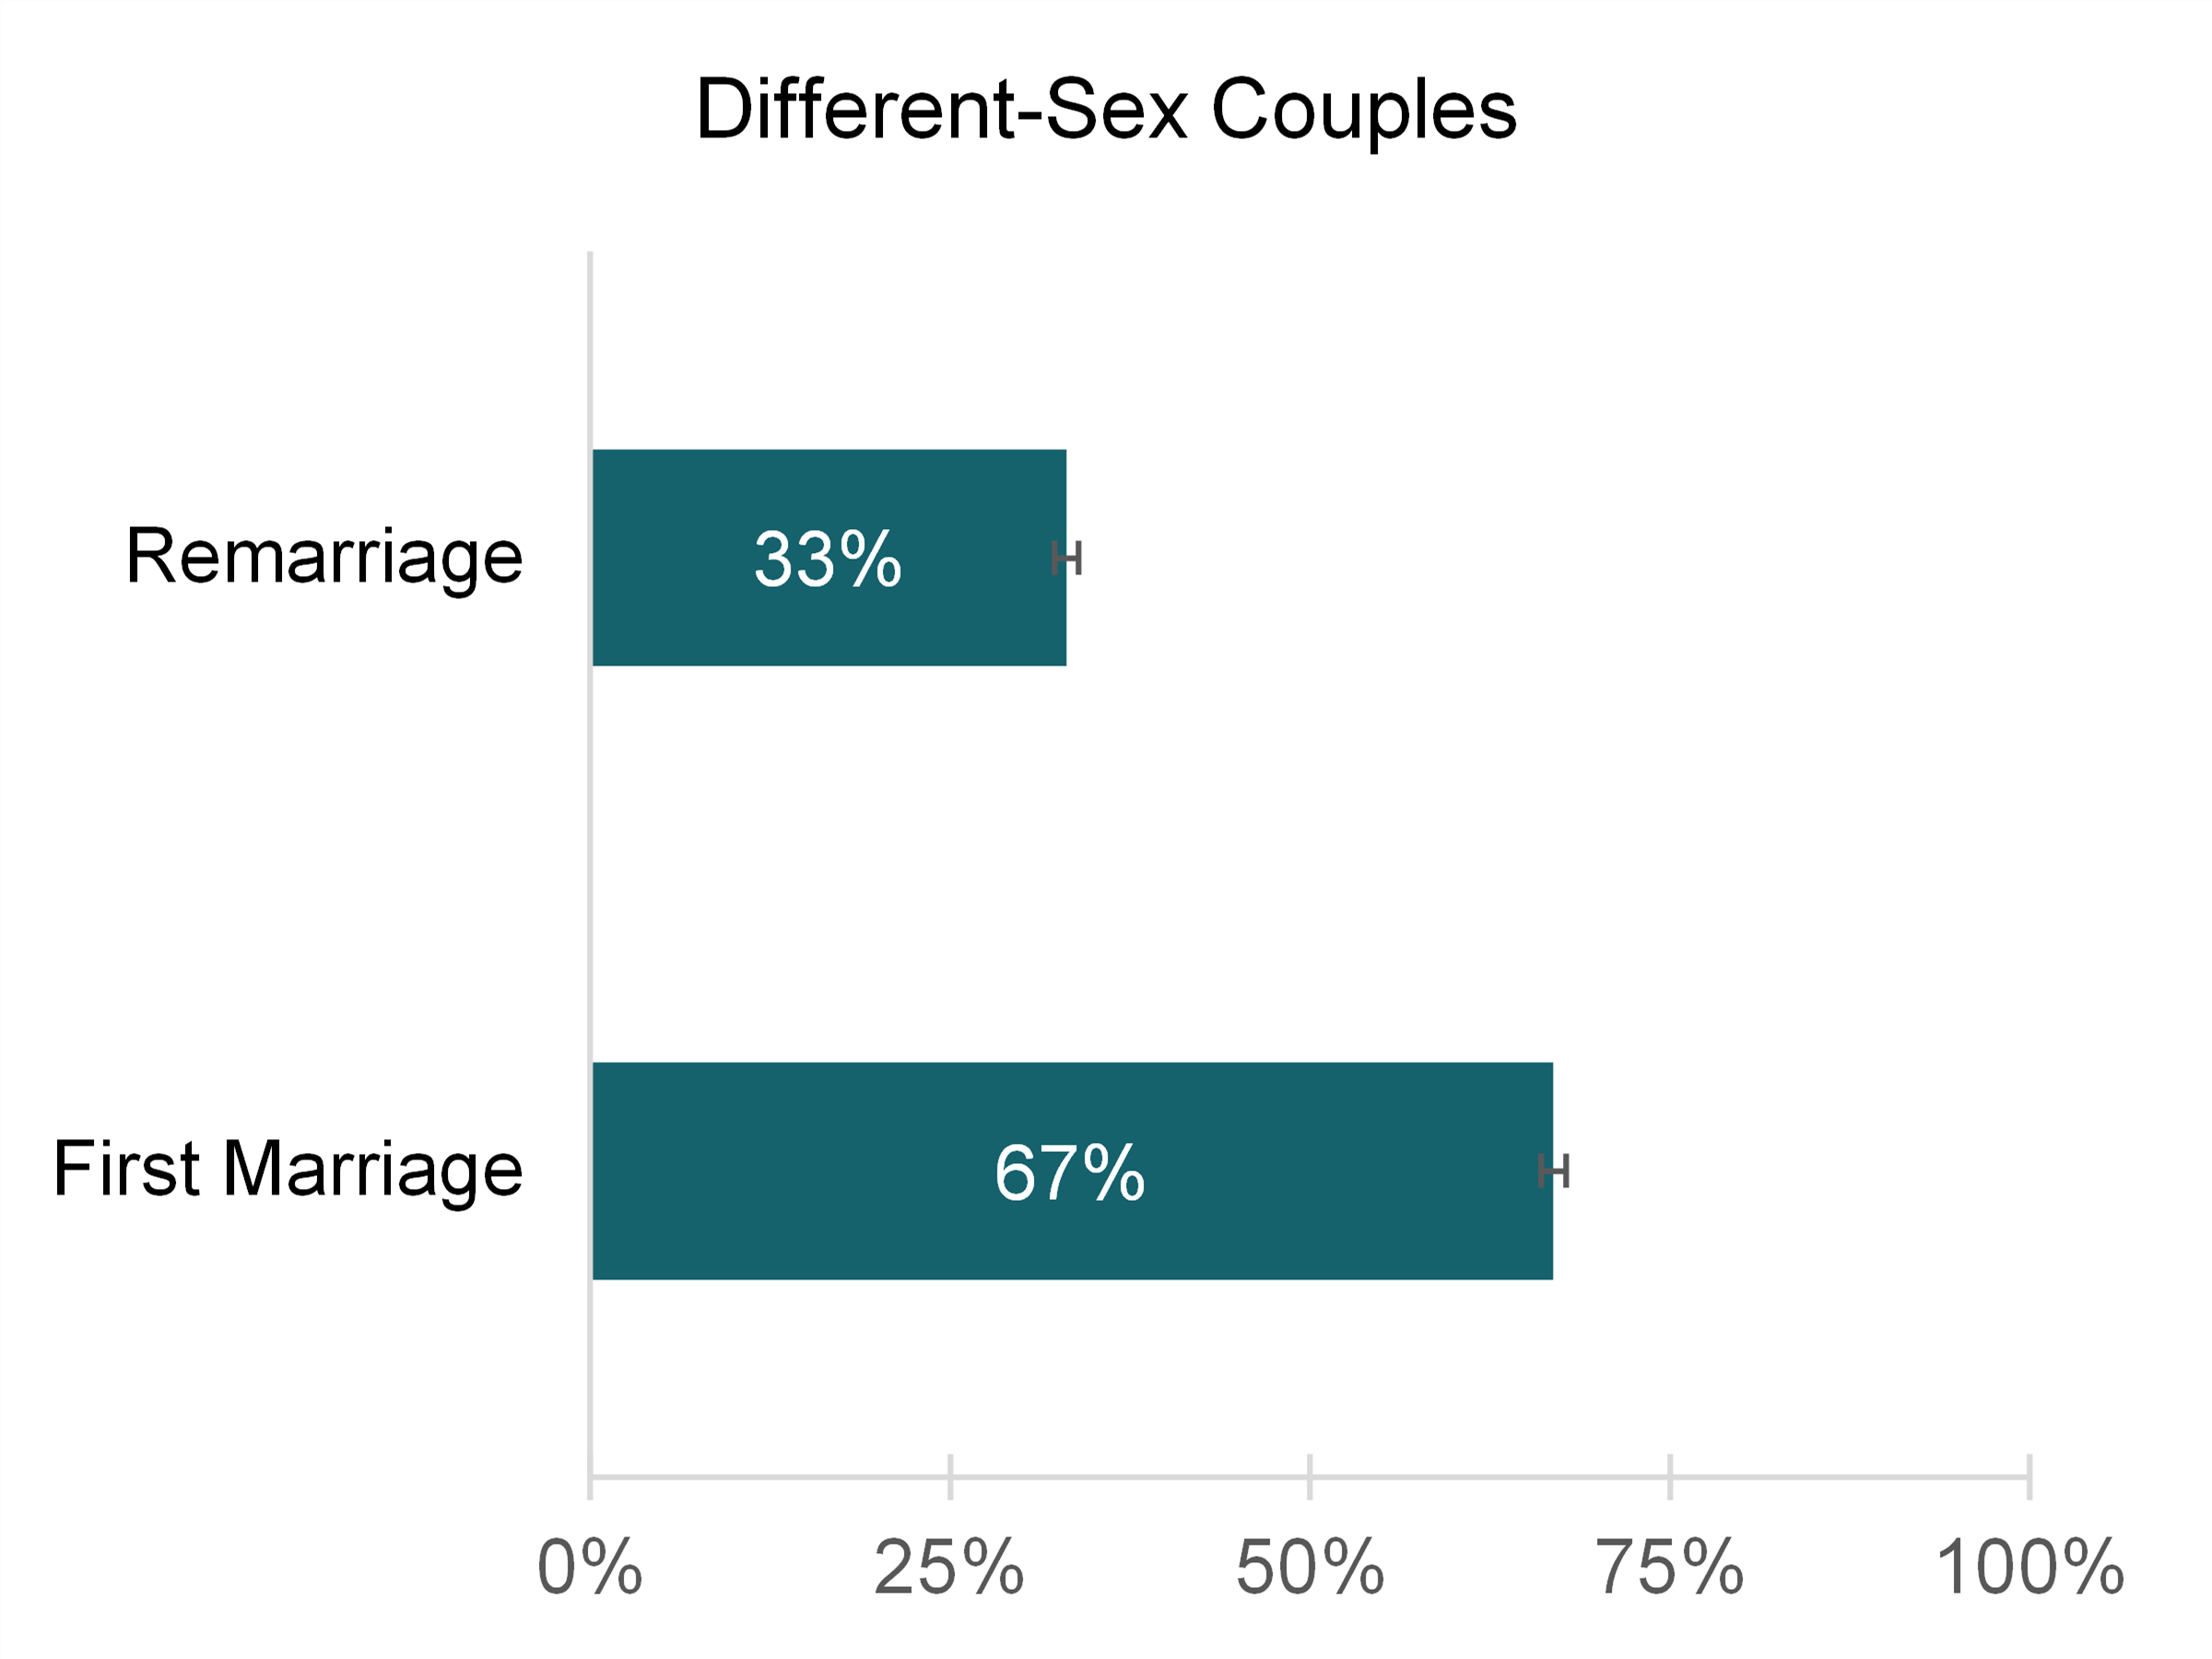 Graph showing Figure 2. First Marriage and Remarriage for Different-Sex Couples, 2022